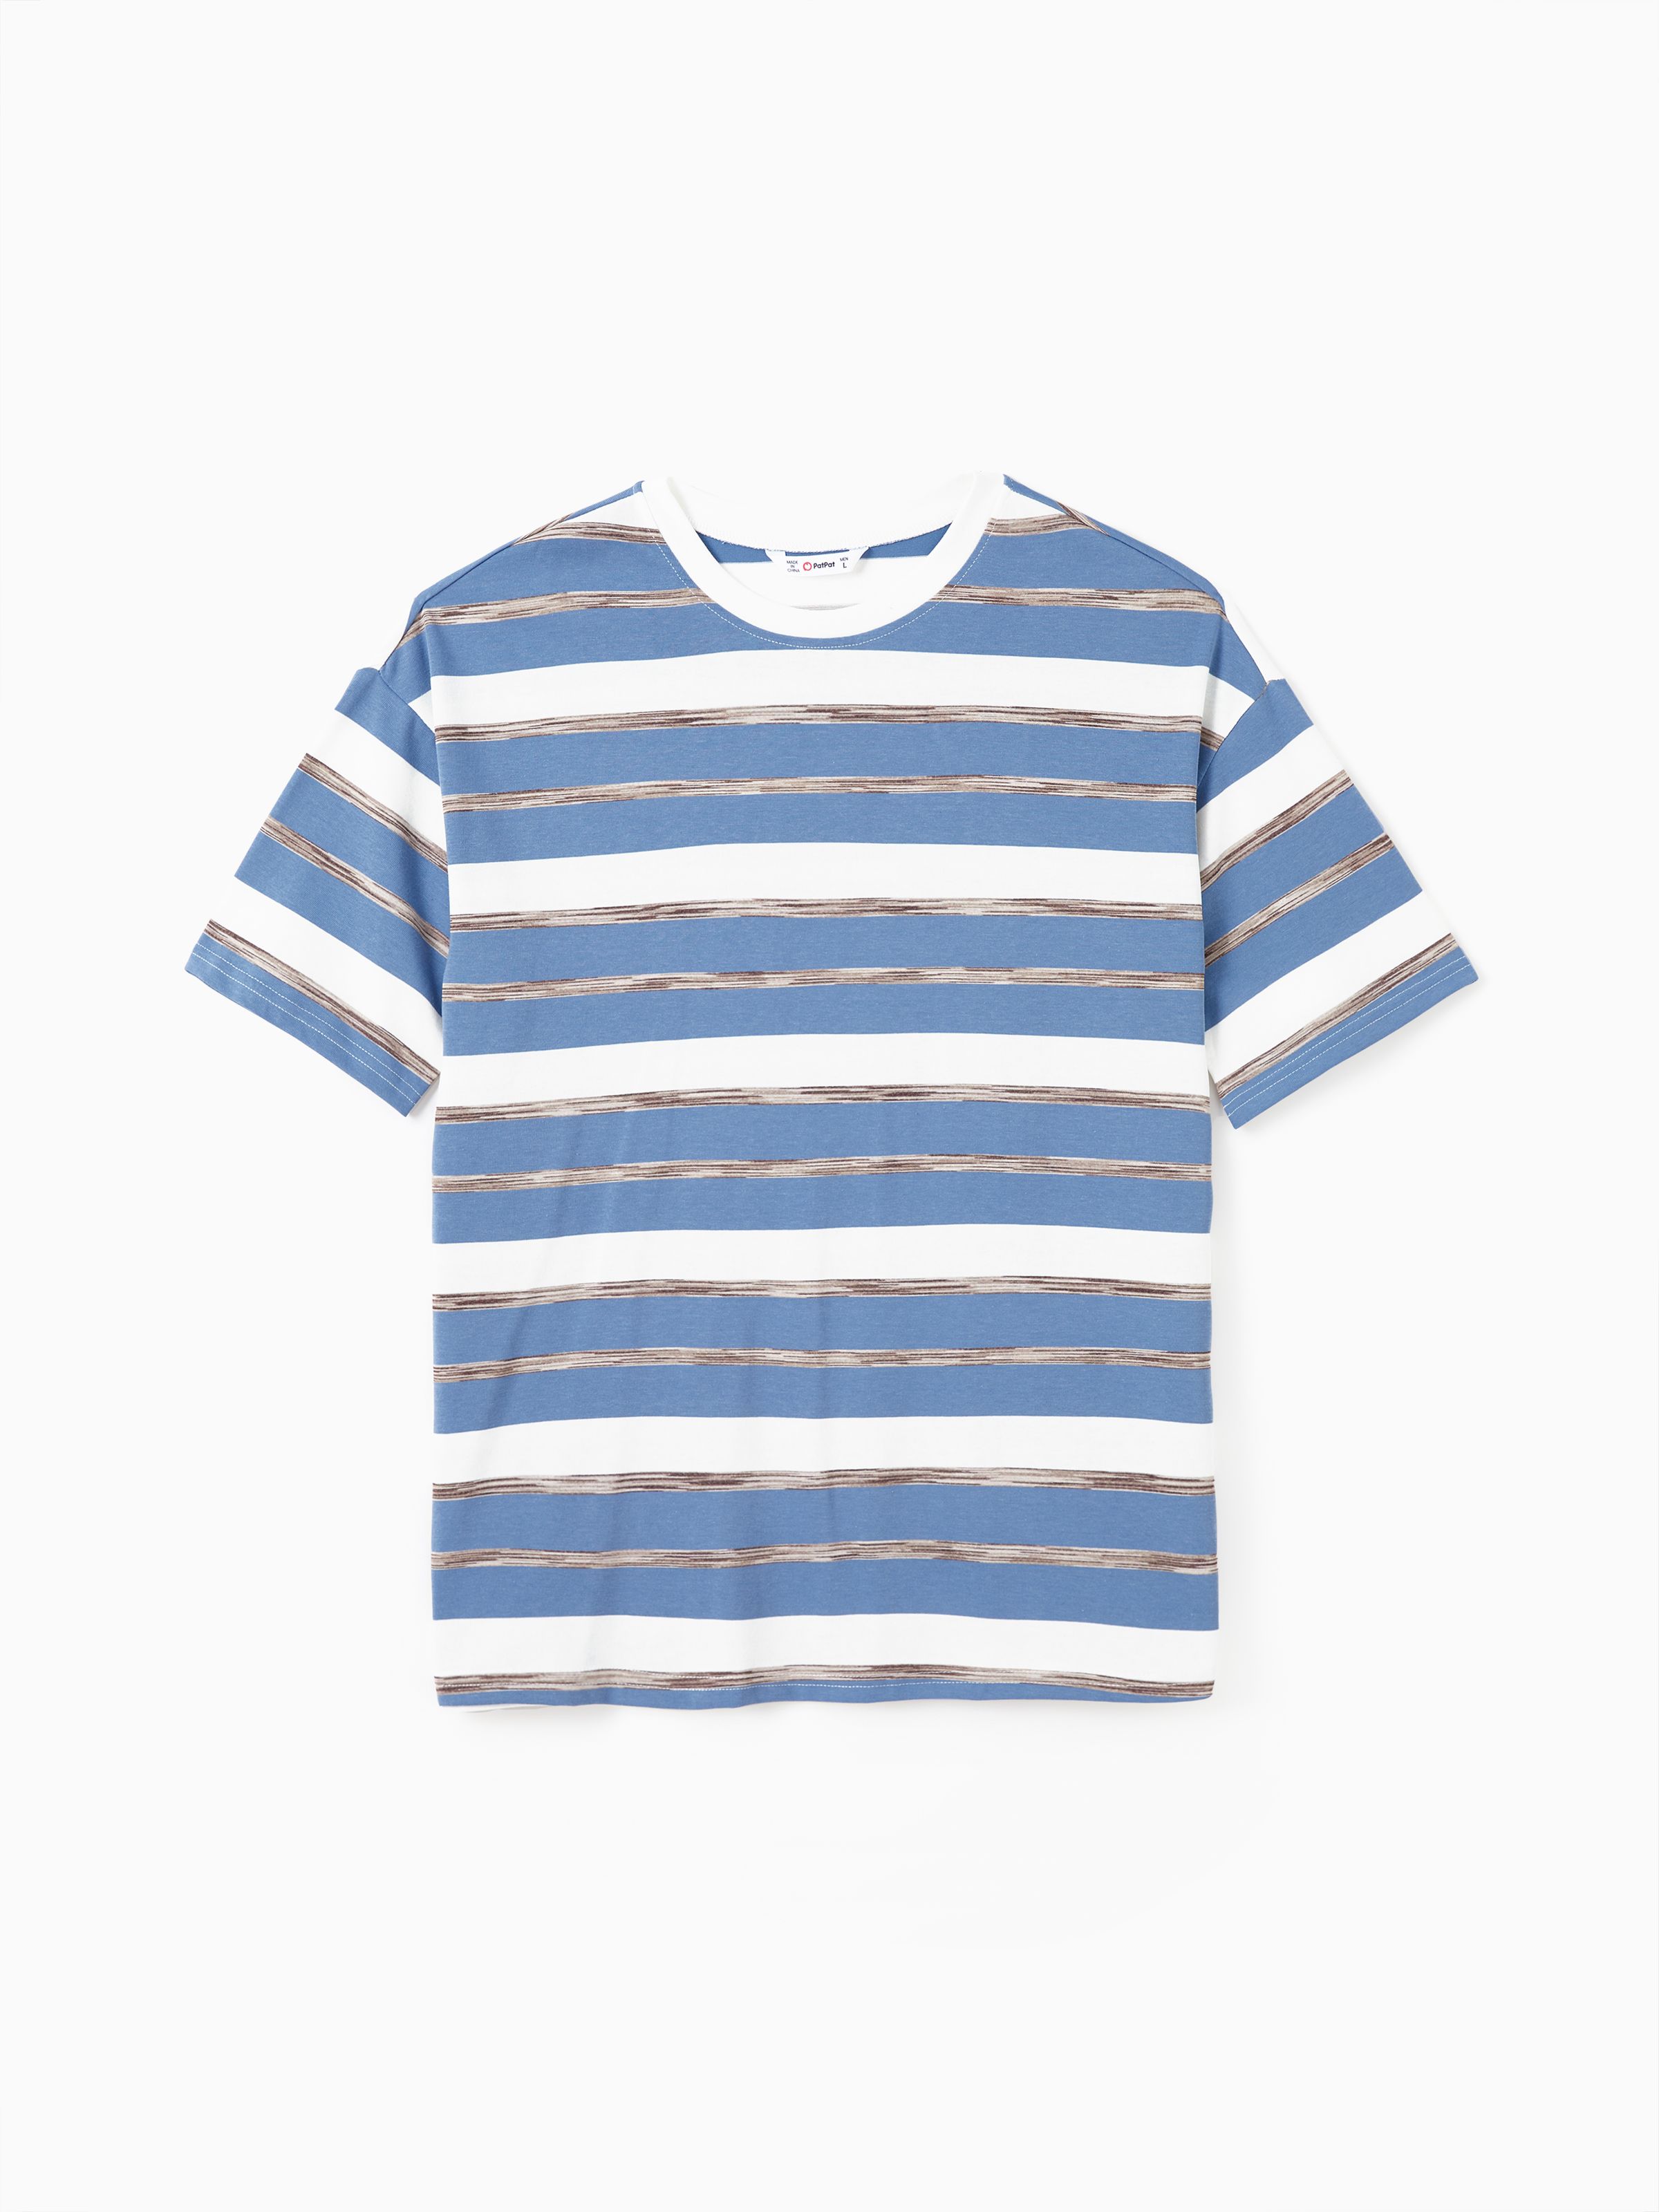 

Family Matching Sets Preppy Style Striped Tee or Sailor Uniform-Inspired Nautical Style Sleeveless Dress